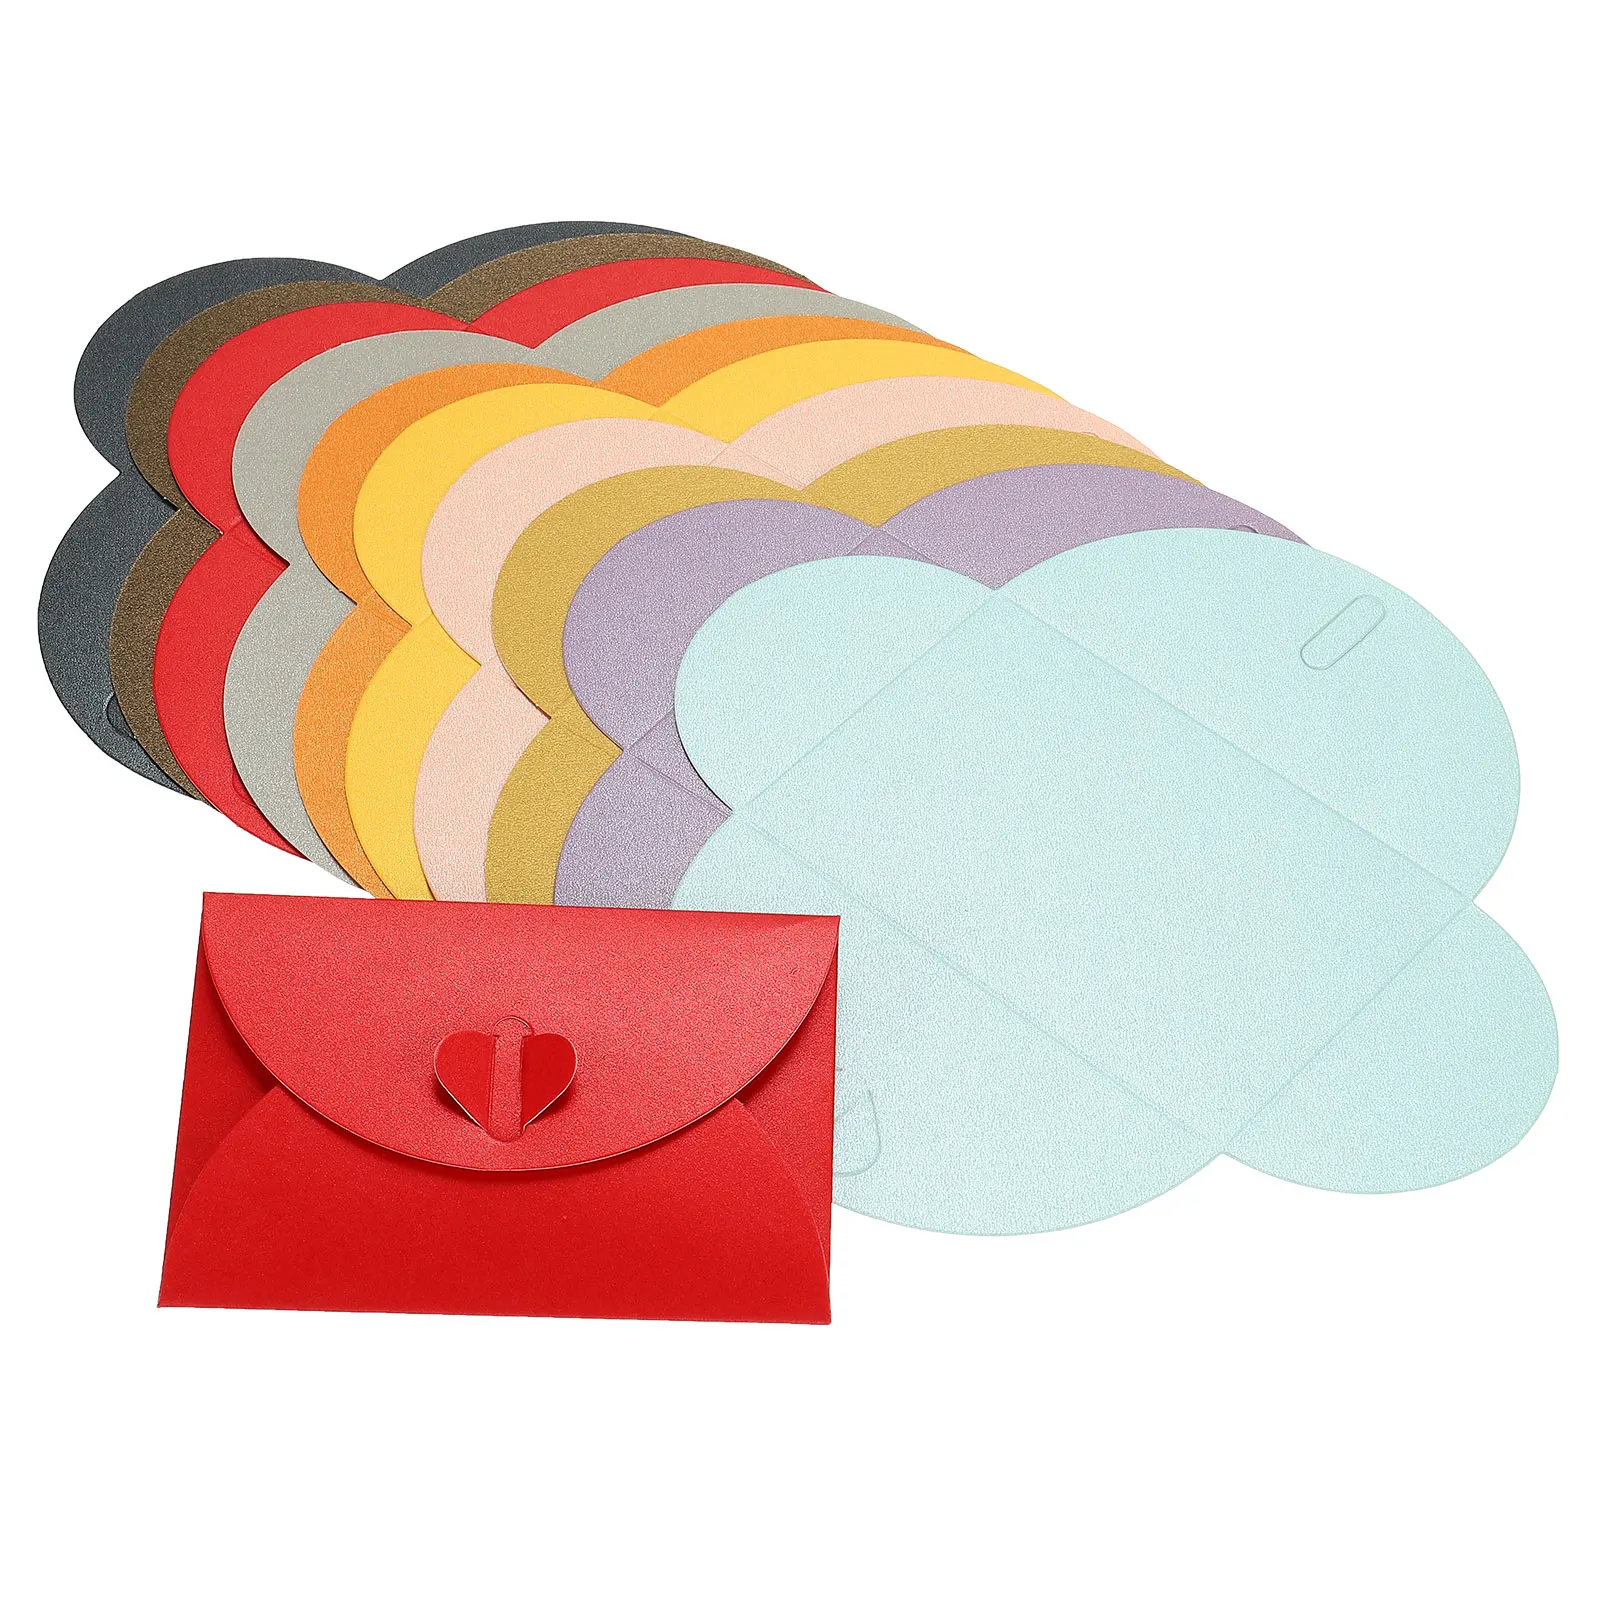 50Pcs Mini Colored Envelope Thick Cardboard Small Foldable DIY Pearl Paper Envelopes Self Locking Buckle Letter Gift Card Cover